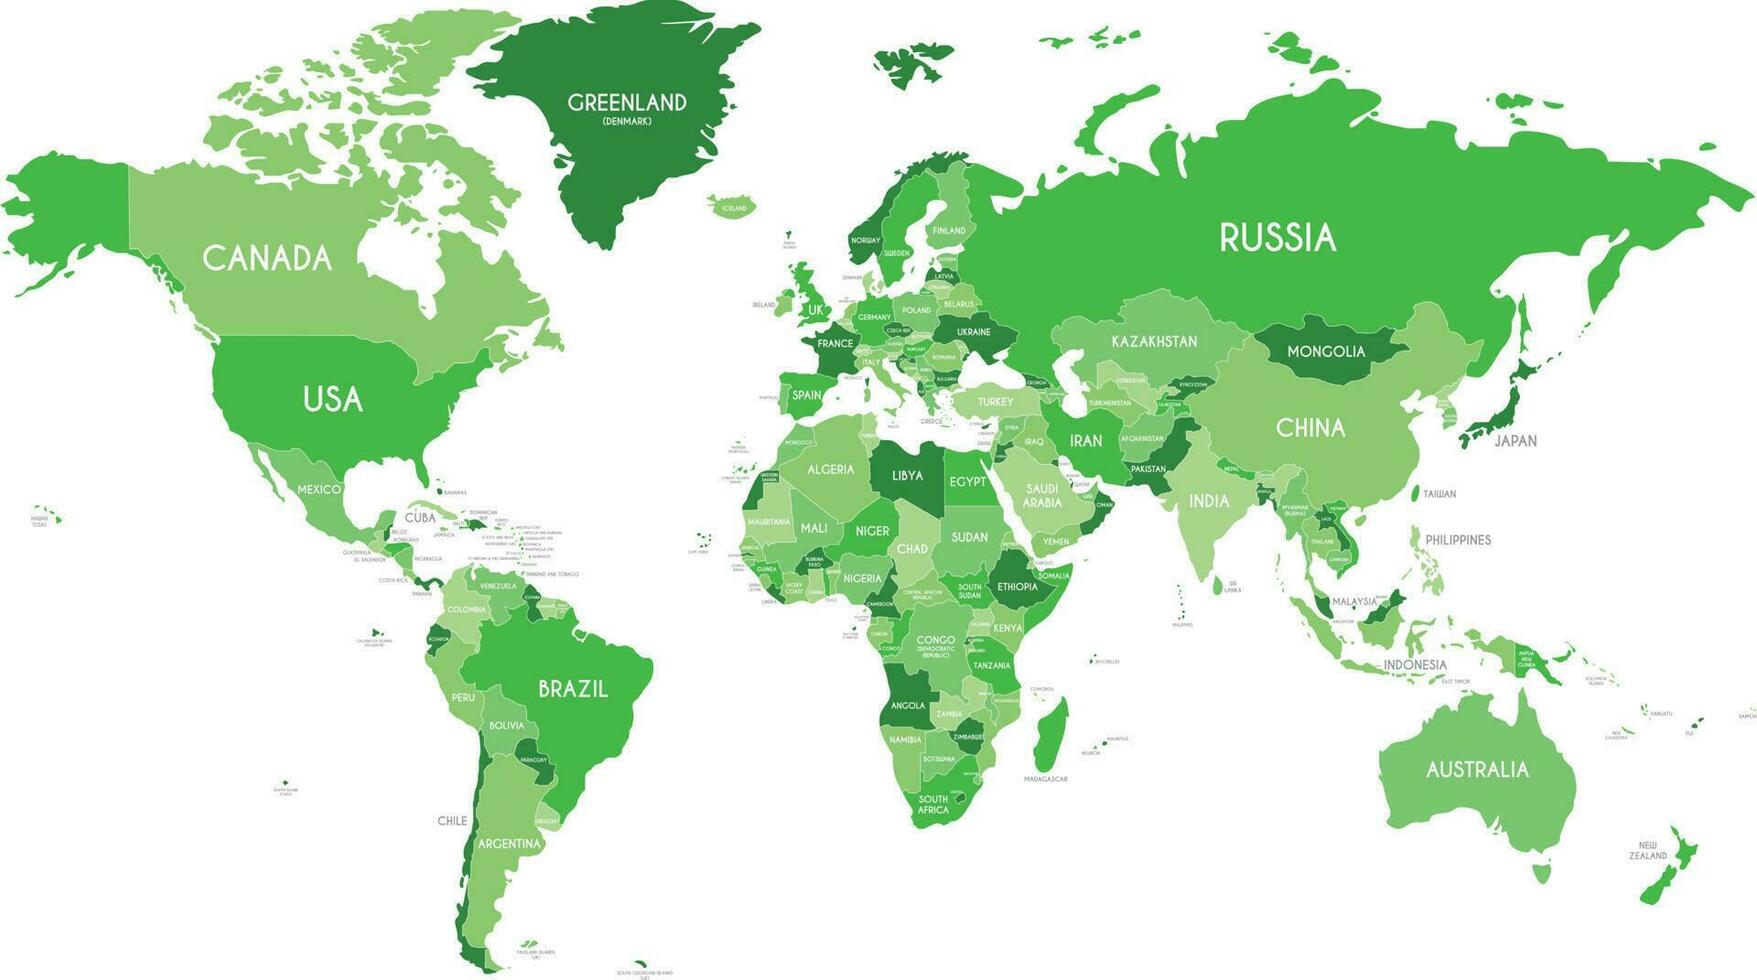 Political World Map vector illustration with different tones of green for each country. Editable and clearly labeled layers.